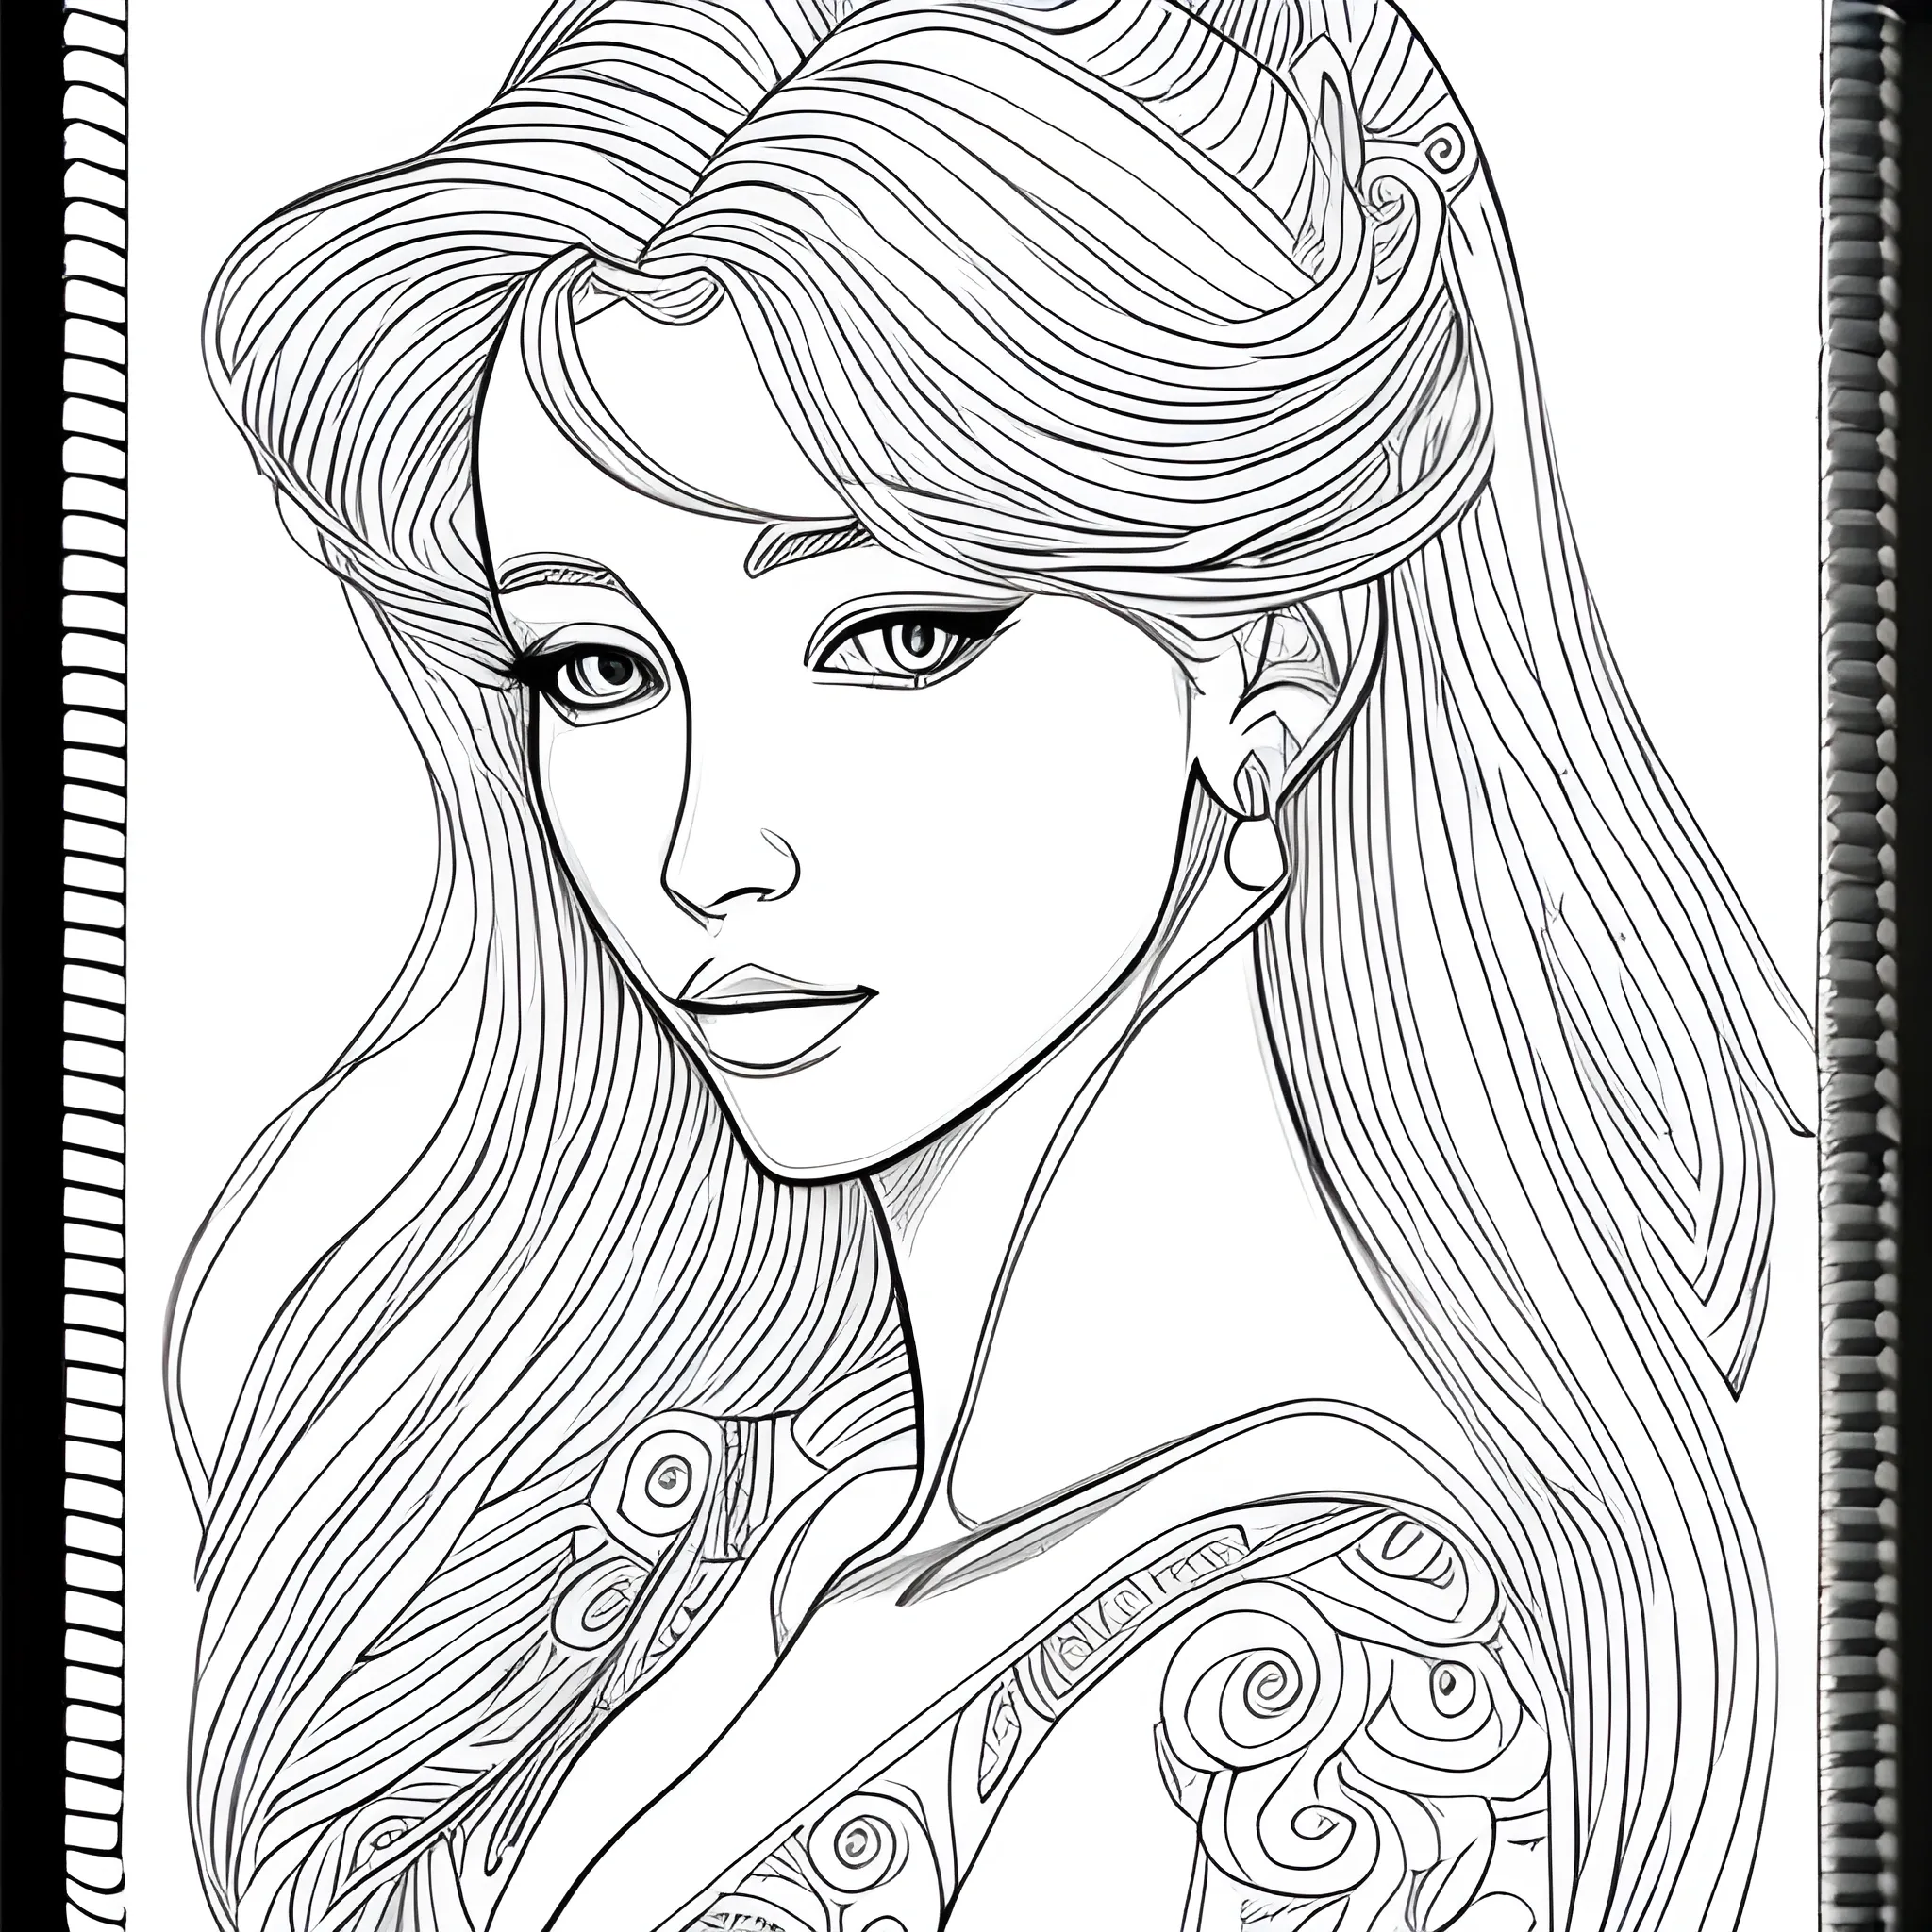 very beautiful woman coloring book page, Pencil Sketch - Arthub.ai